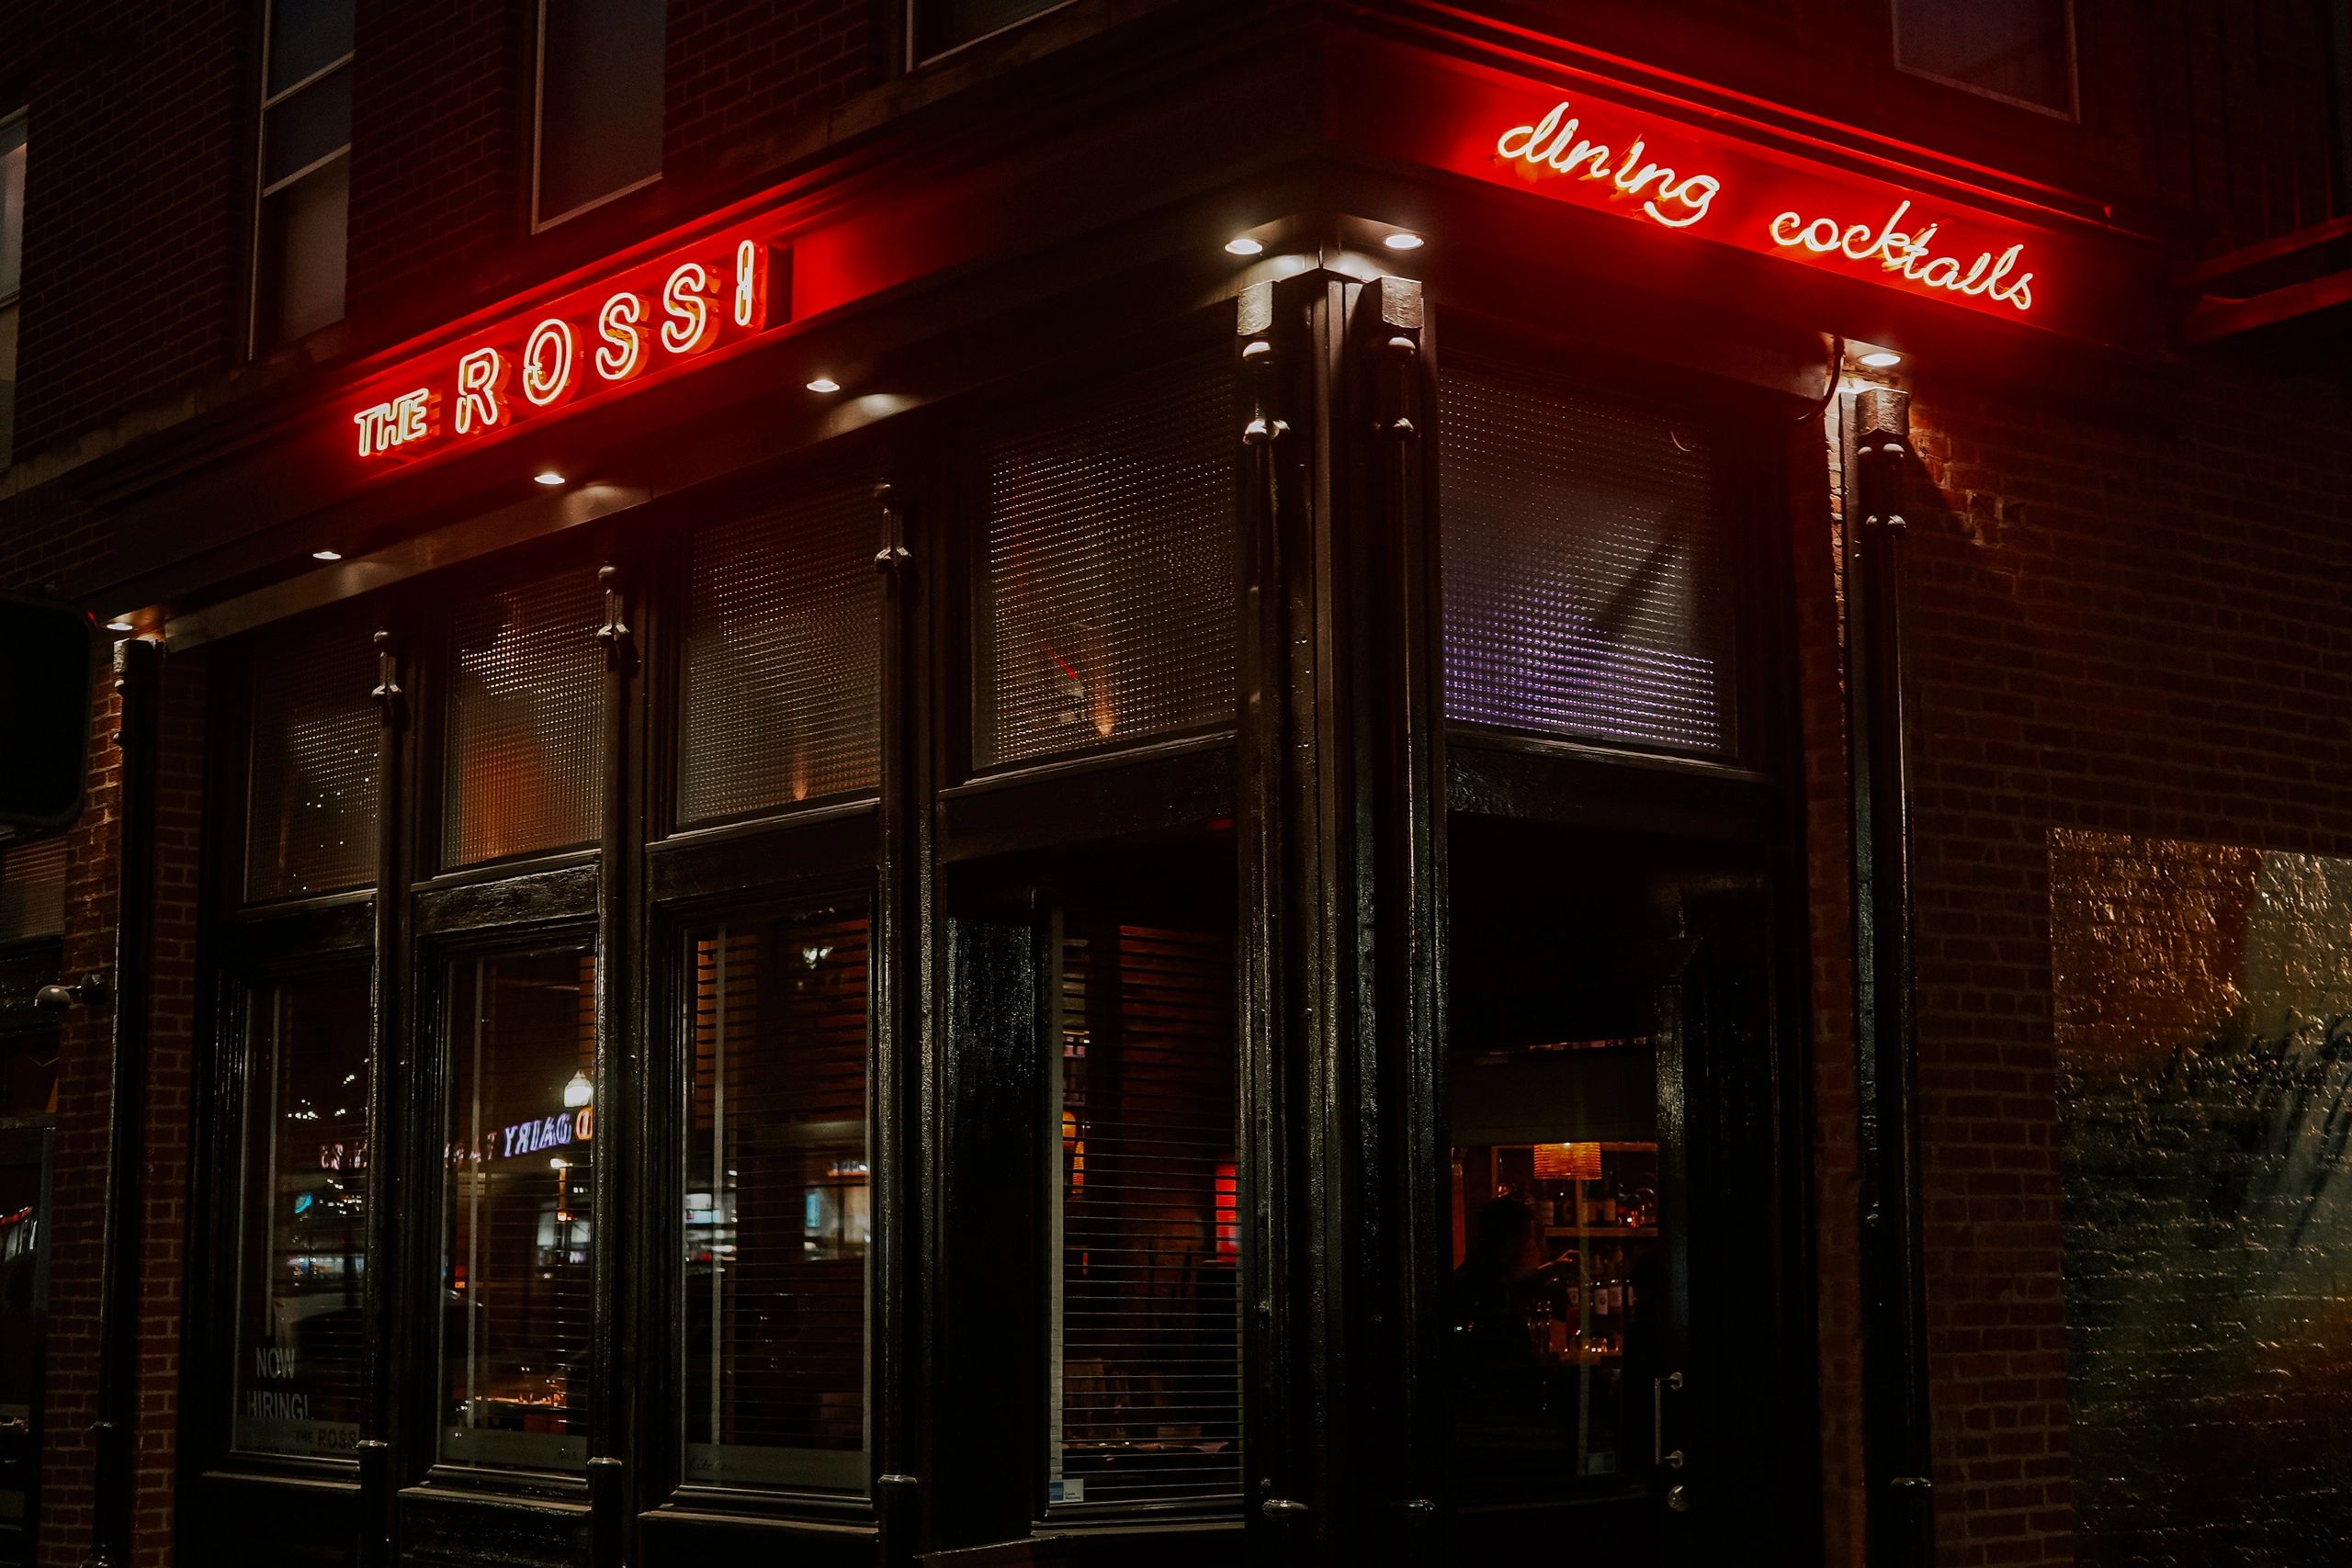 the rossi bar kitchen